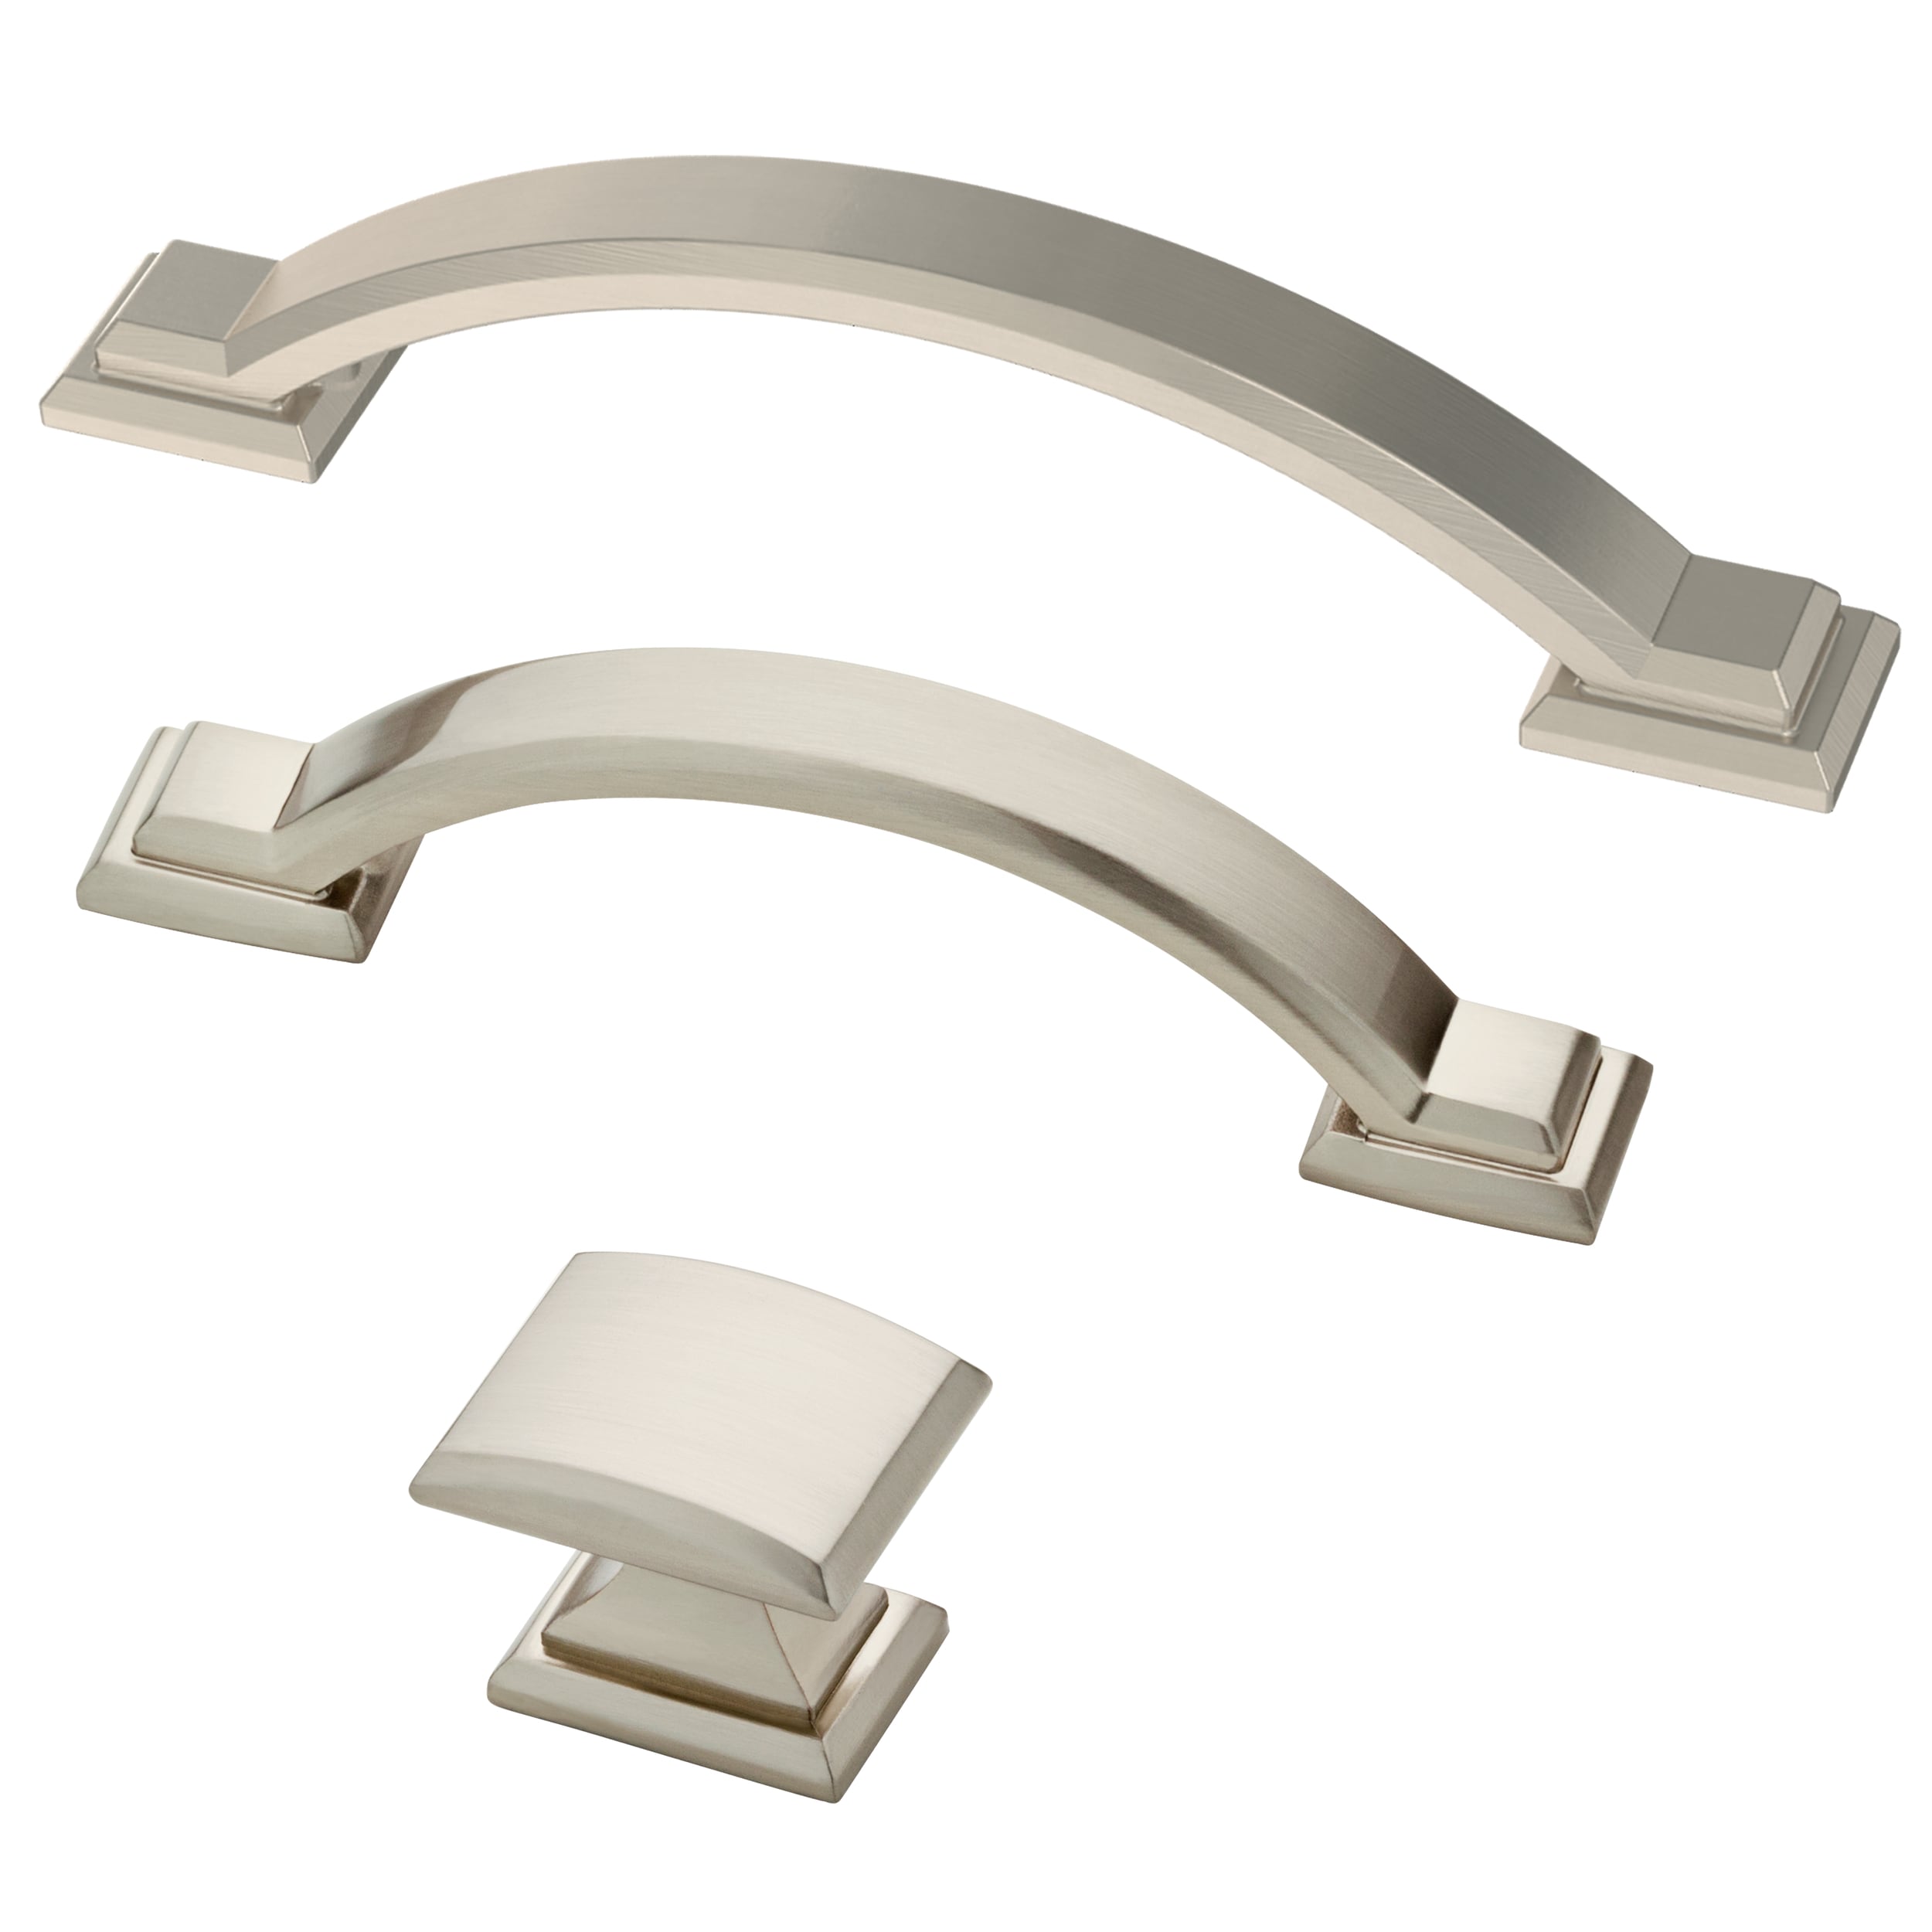 Cabinet Hardware and Accessories